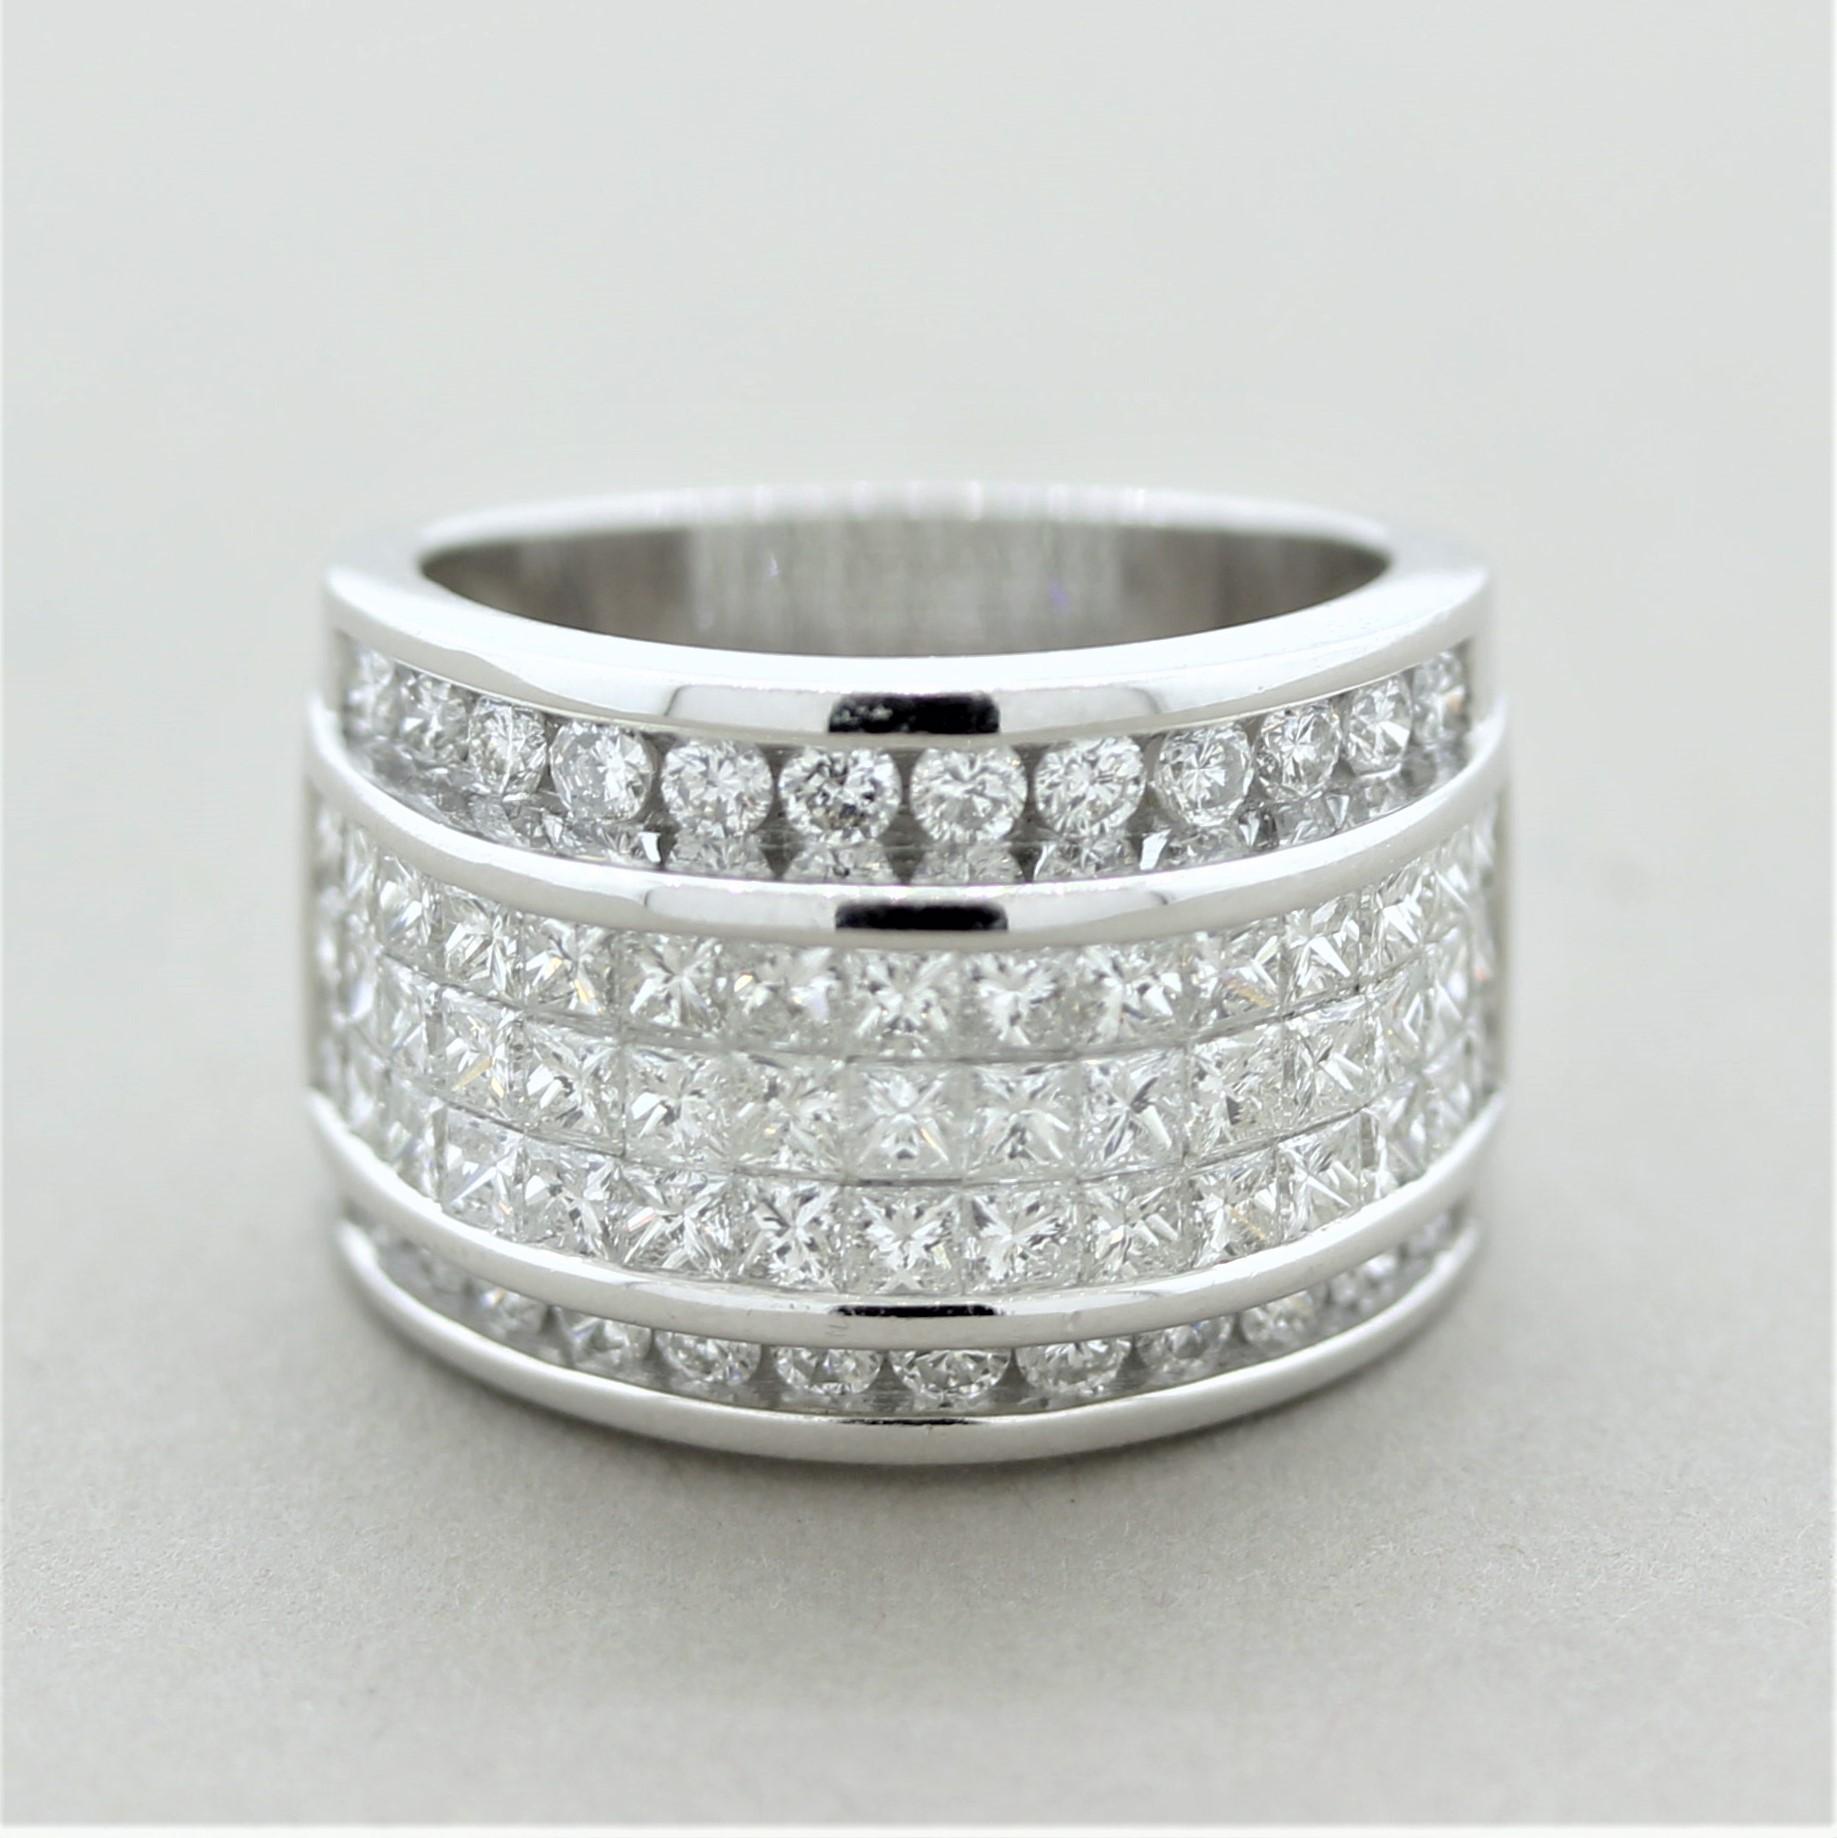 A stylish ring featuring 3.64 carats of fine diamonds. In the center of the ring are 3 rows of princess-cut diamonds which are invisible set (famous diamond setting technique by Van Cleef & Arpels). On the outsides of the ring are two rows of round